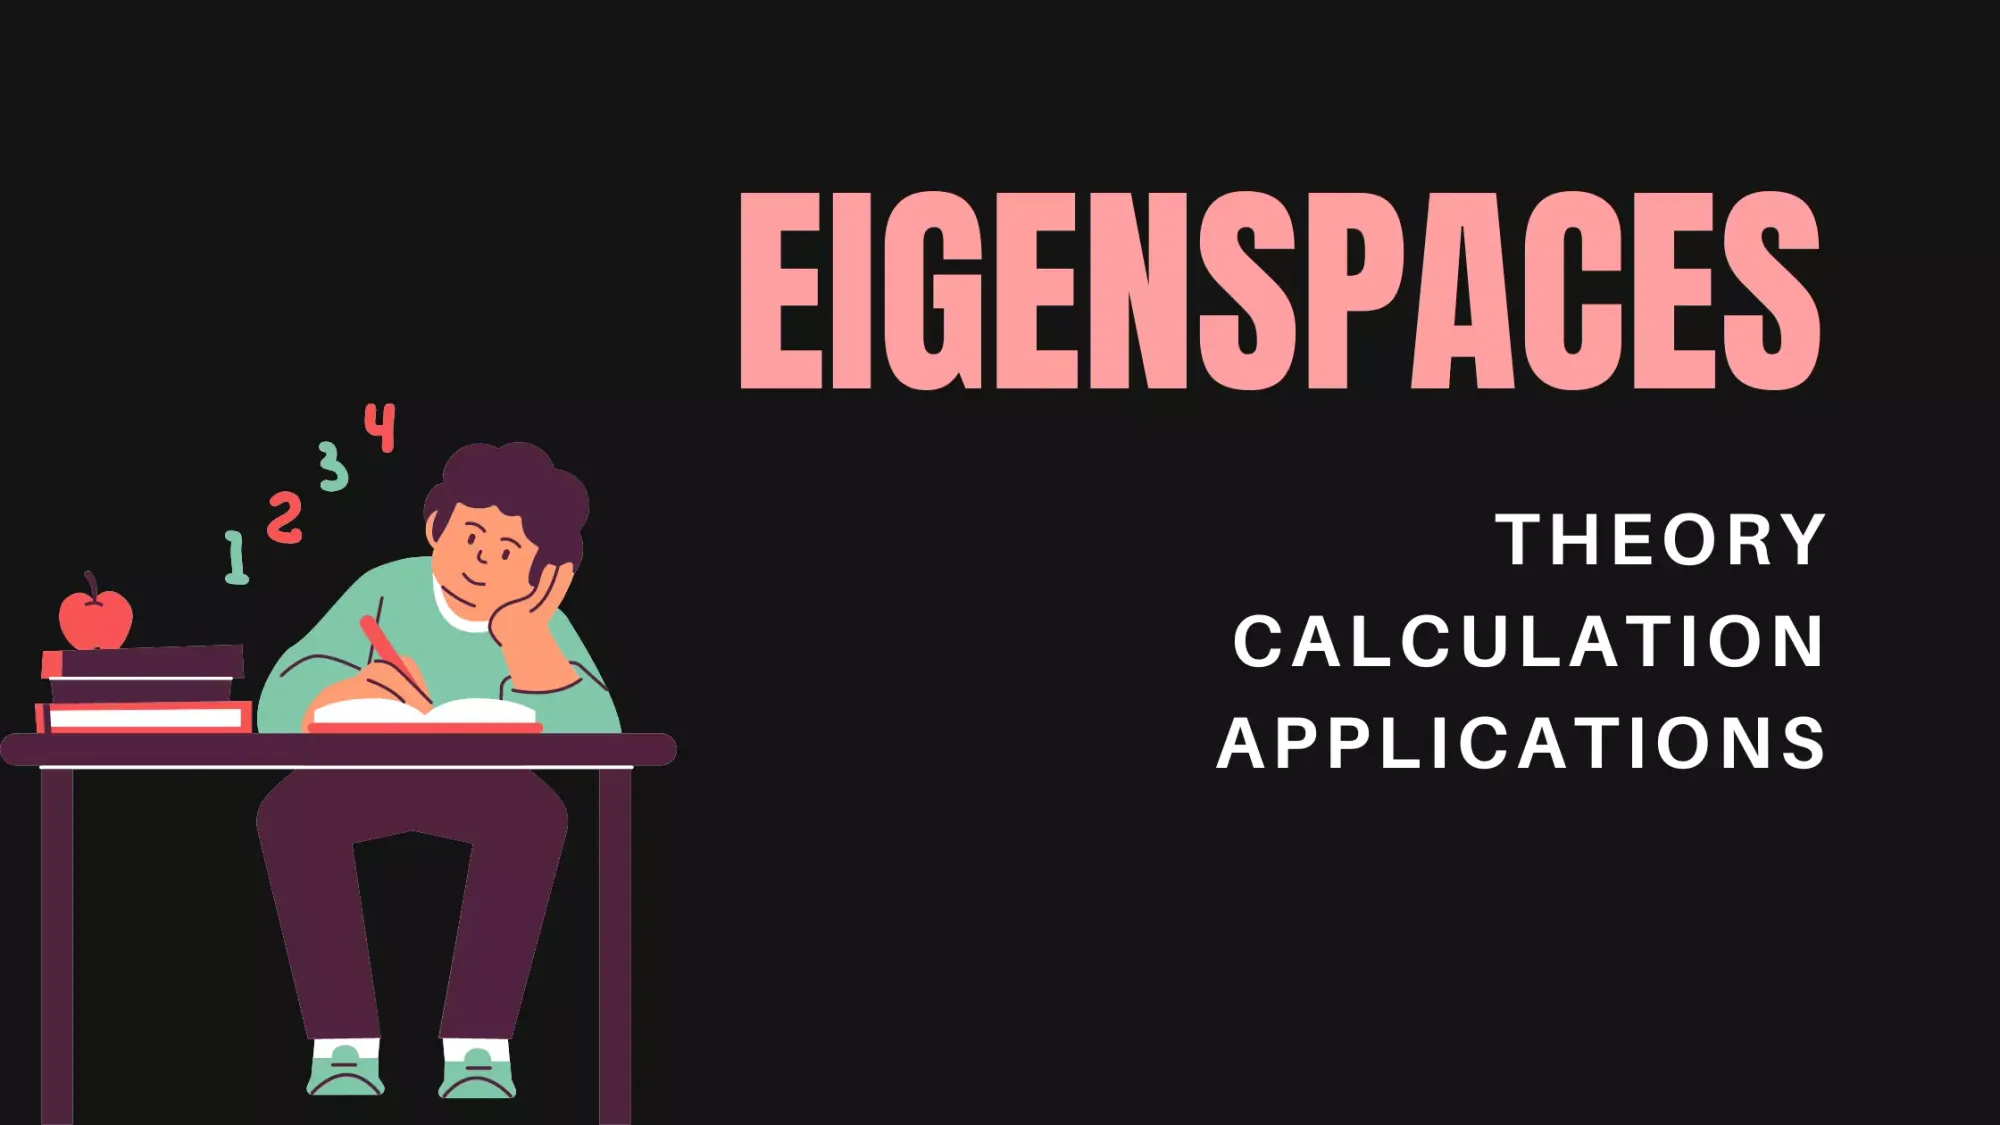 Eigenspaces - Theory, Calculation and Applications